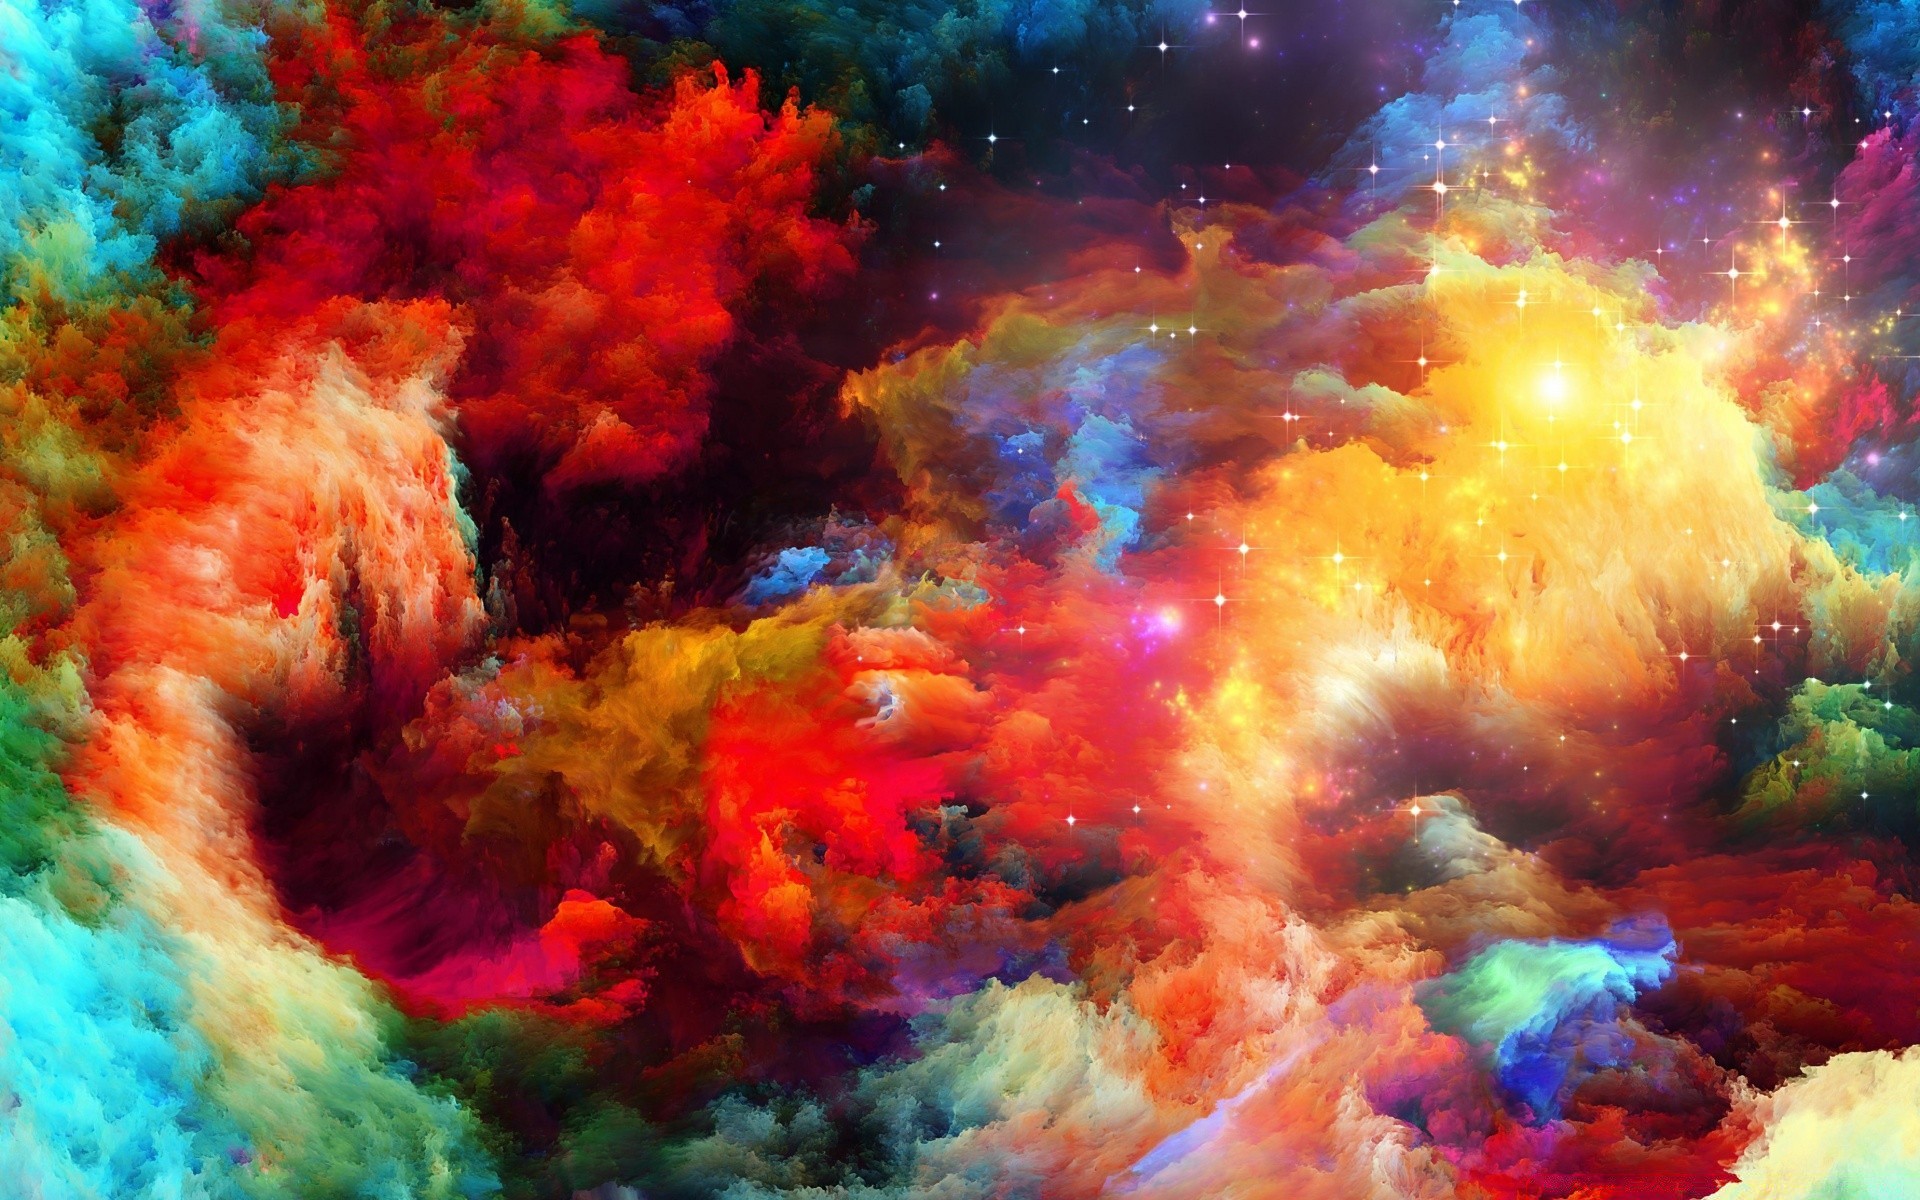 bright colors surreal dream abstract hallucination creativity fantasy imagery apparition inspiration texture composition